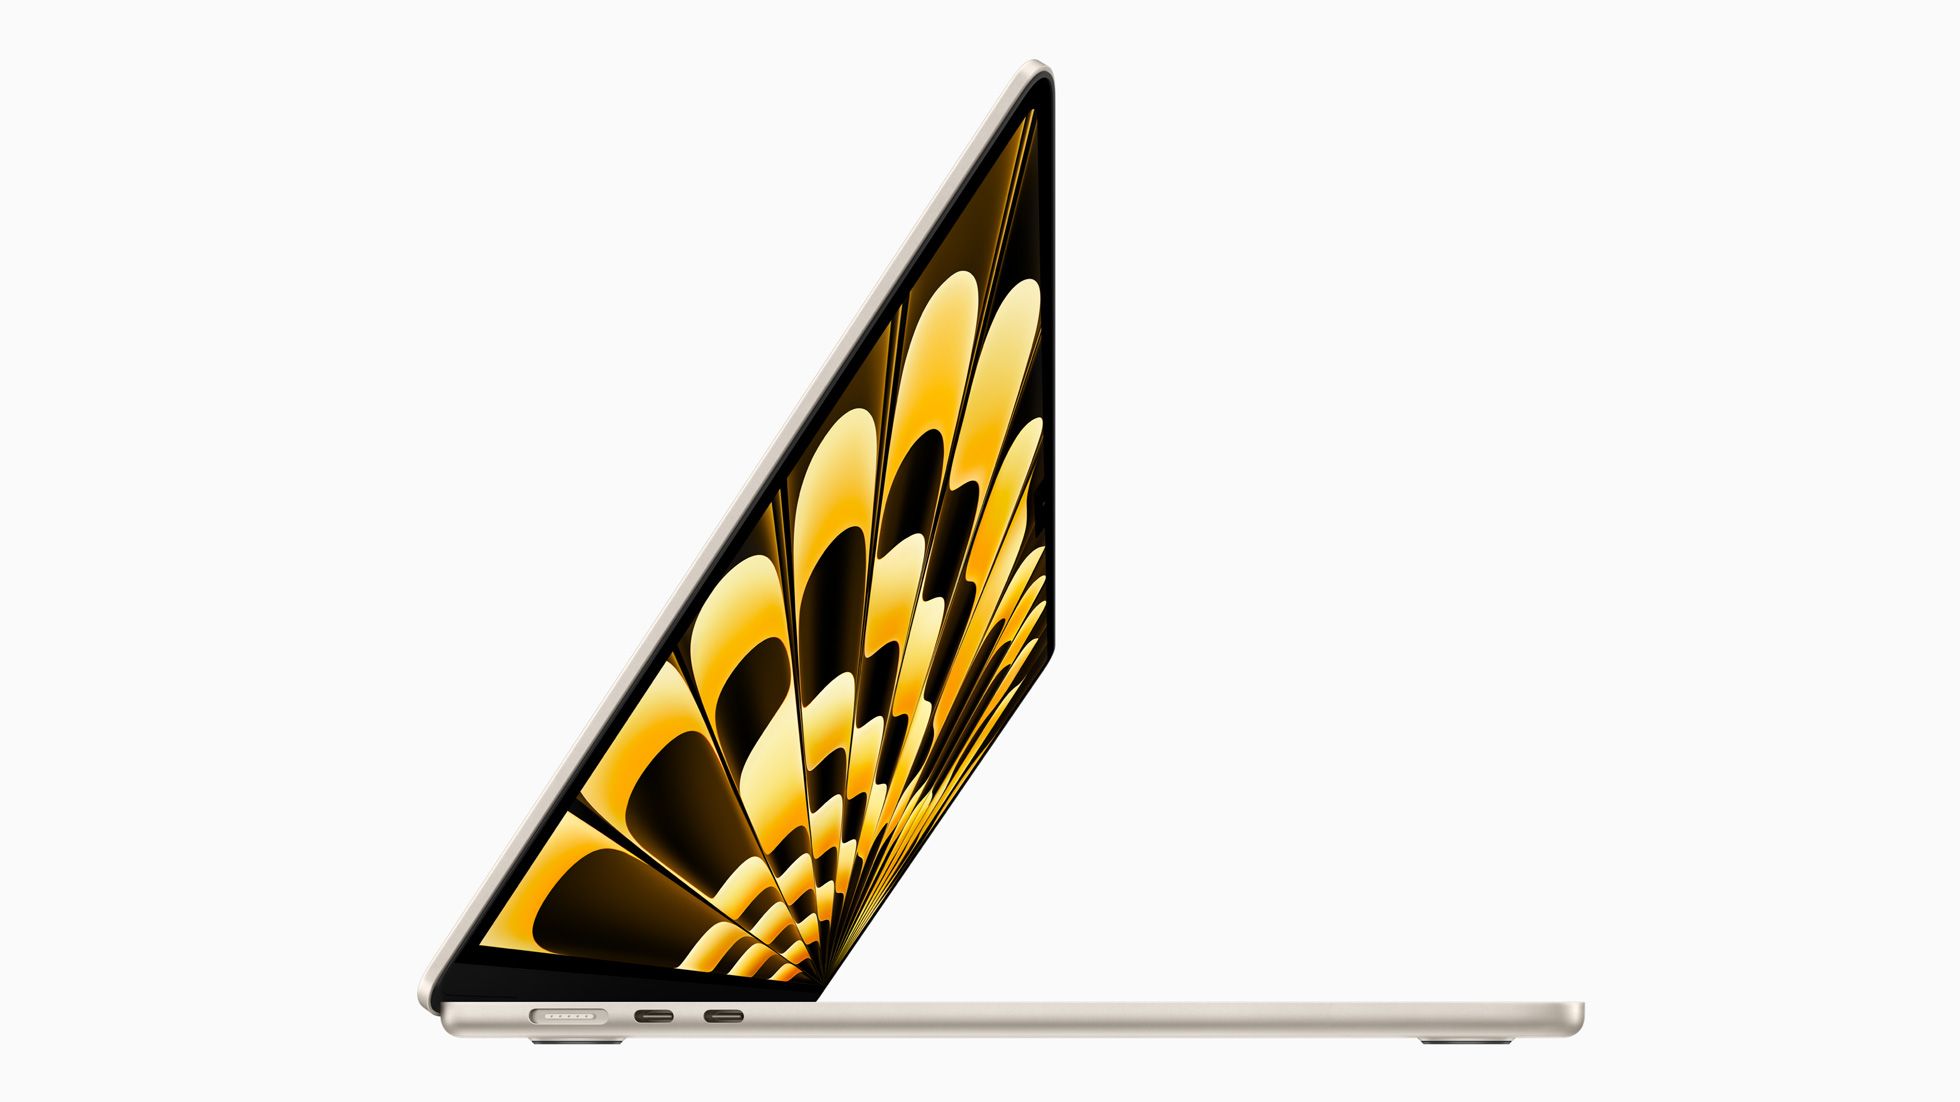 M3 MacBook Air tipped for 2024 release date